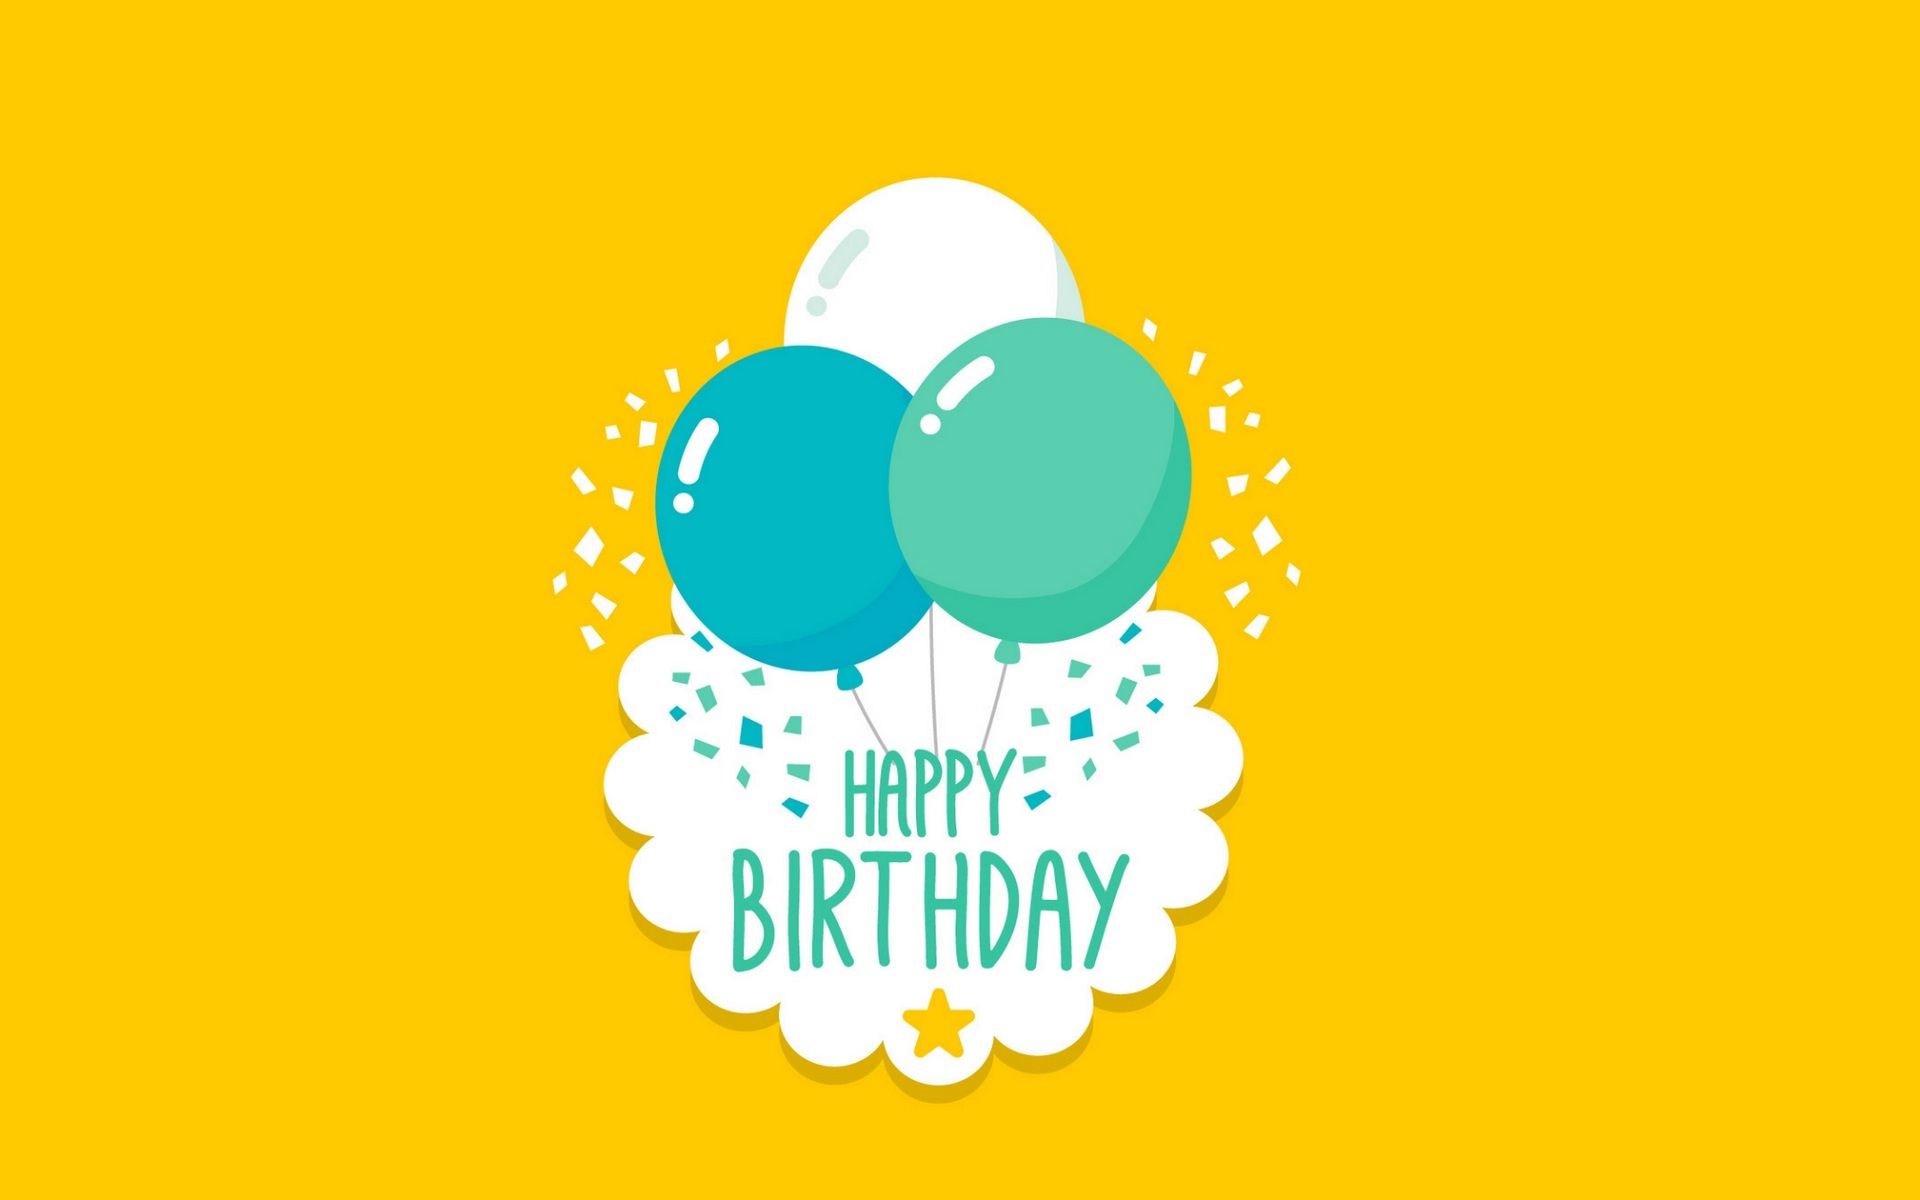 Simple Beautiful Wallpapers - Happy Birthday Wishes In Yellow , HD Wallpaper & Backgrounds